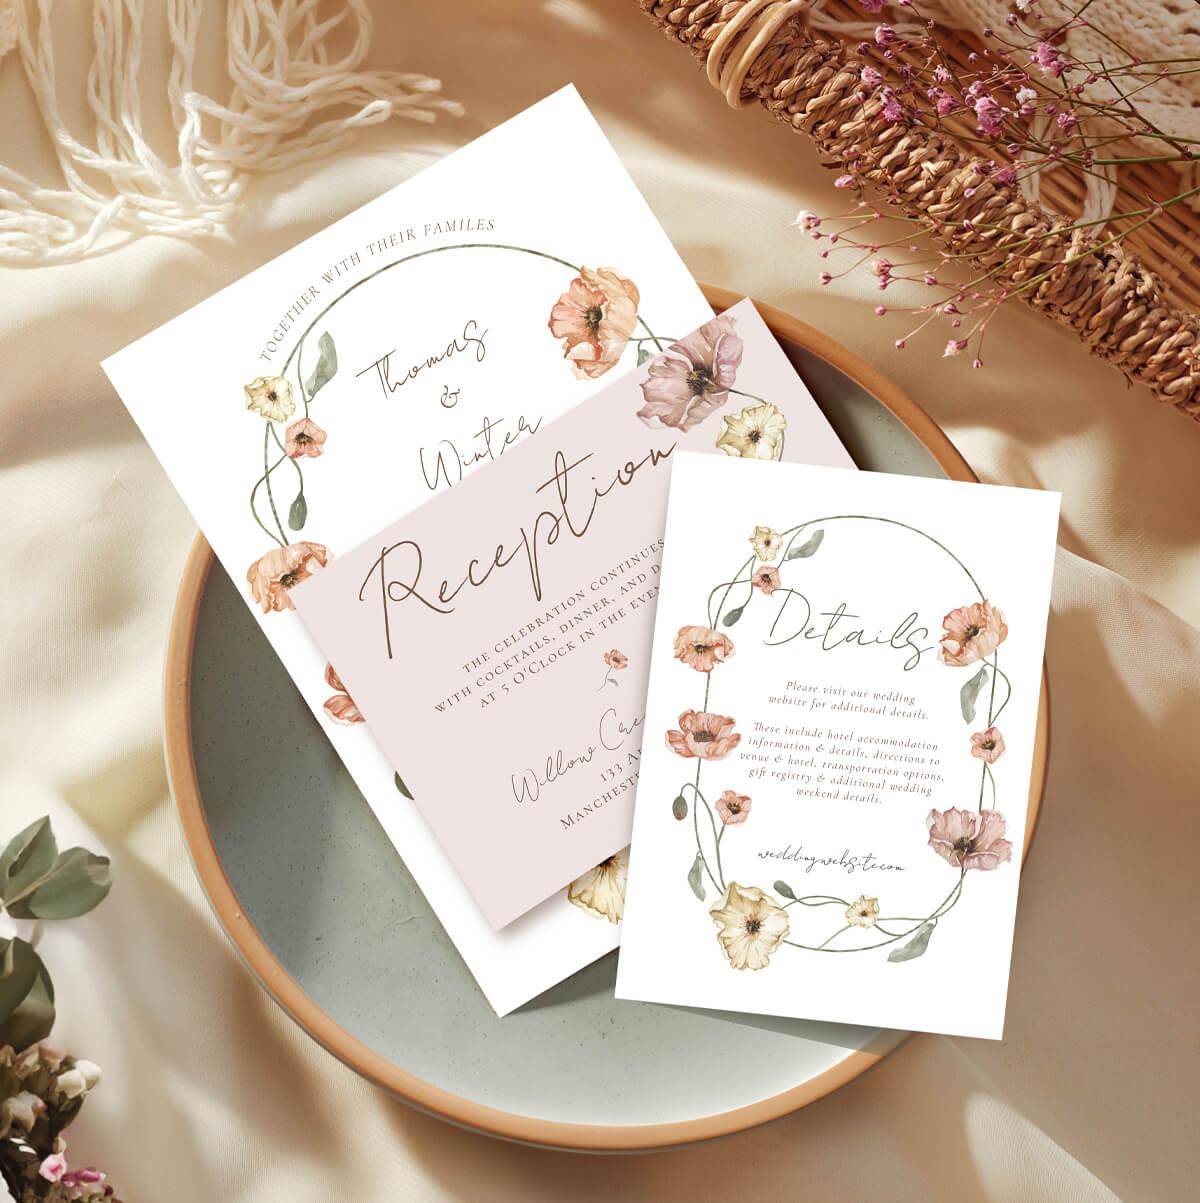 Wild Iceland Poppies Wedding Collection By Moodthology Papery